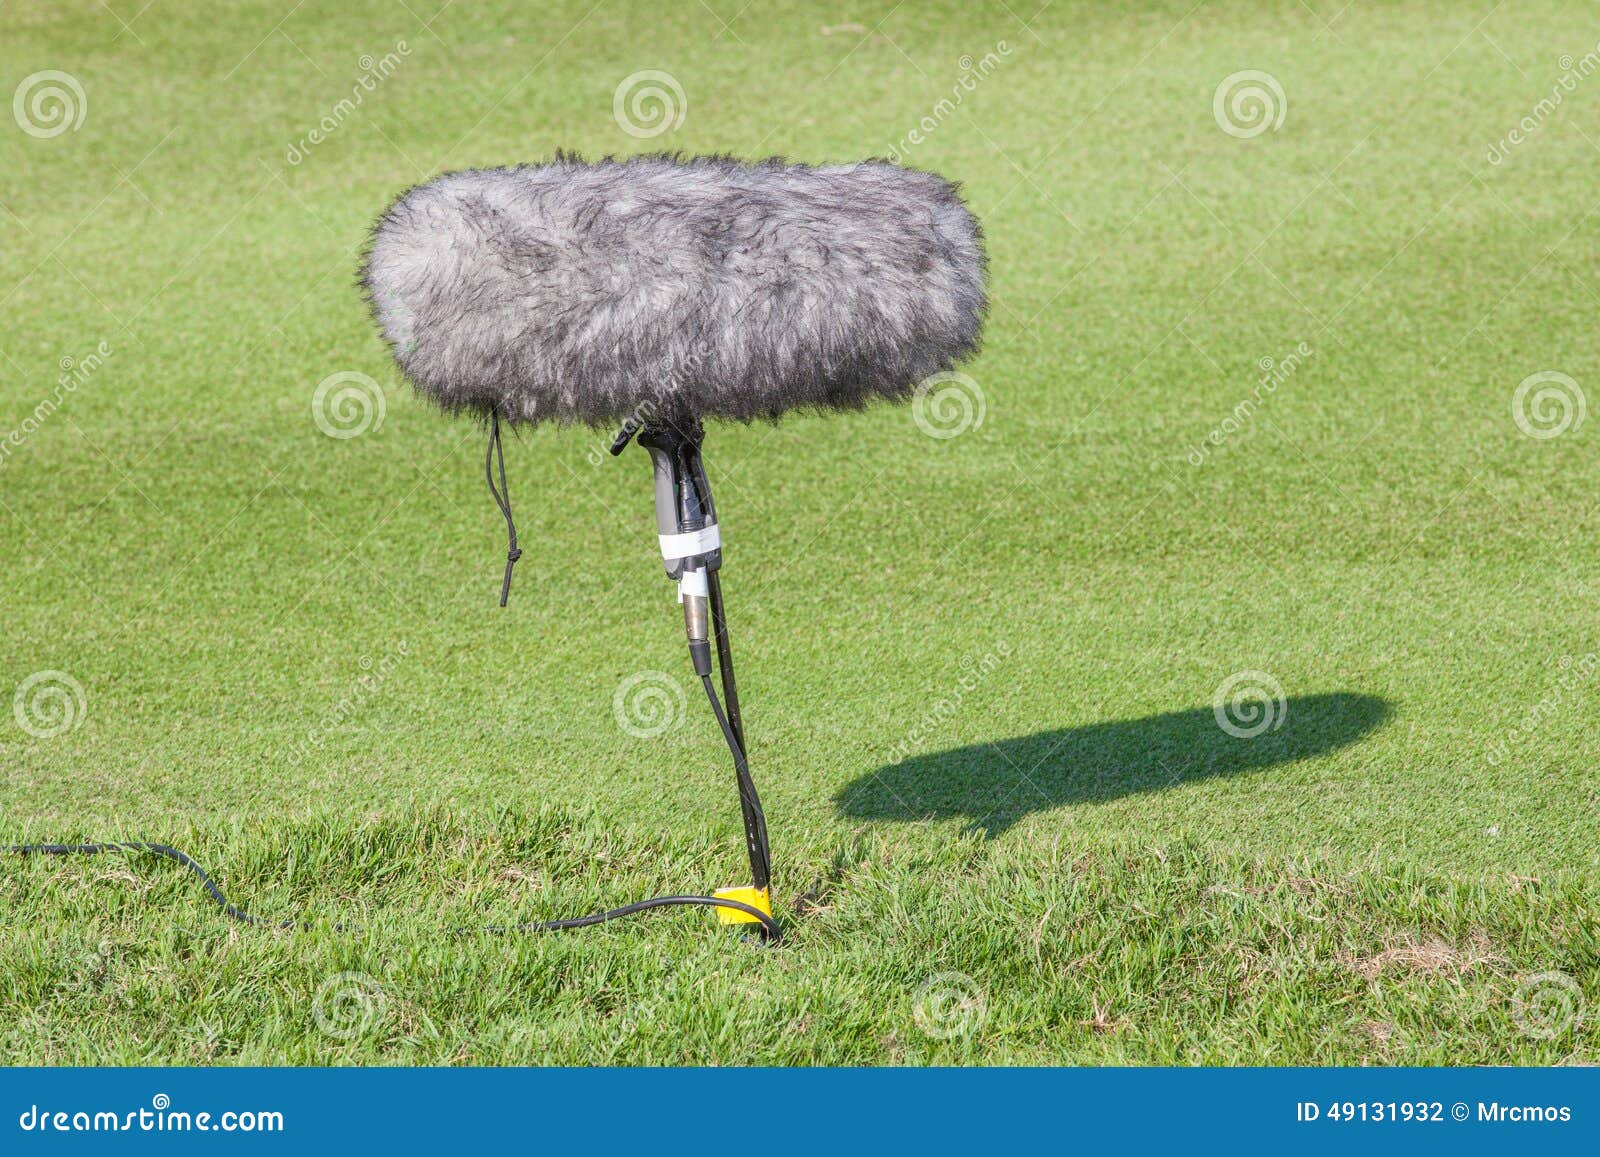 A Large Microphone Boom with Windshield Situated in Golf Tournament for Live Broadcasting